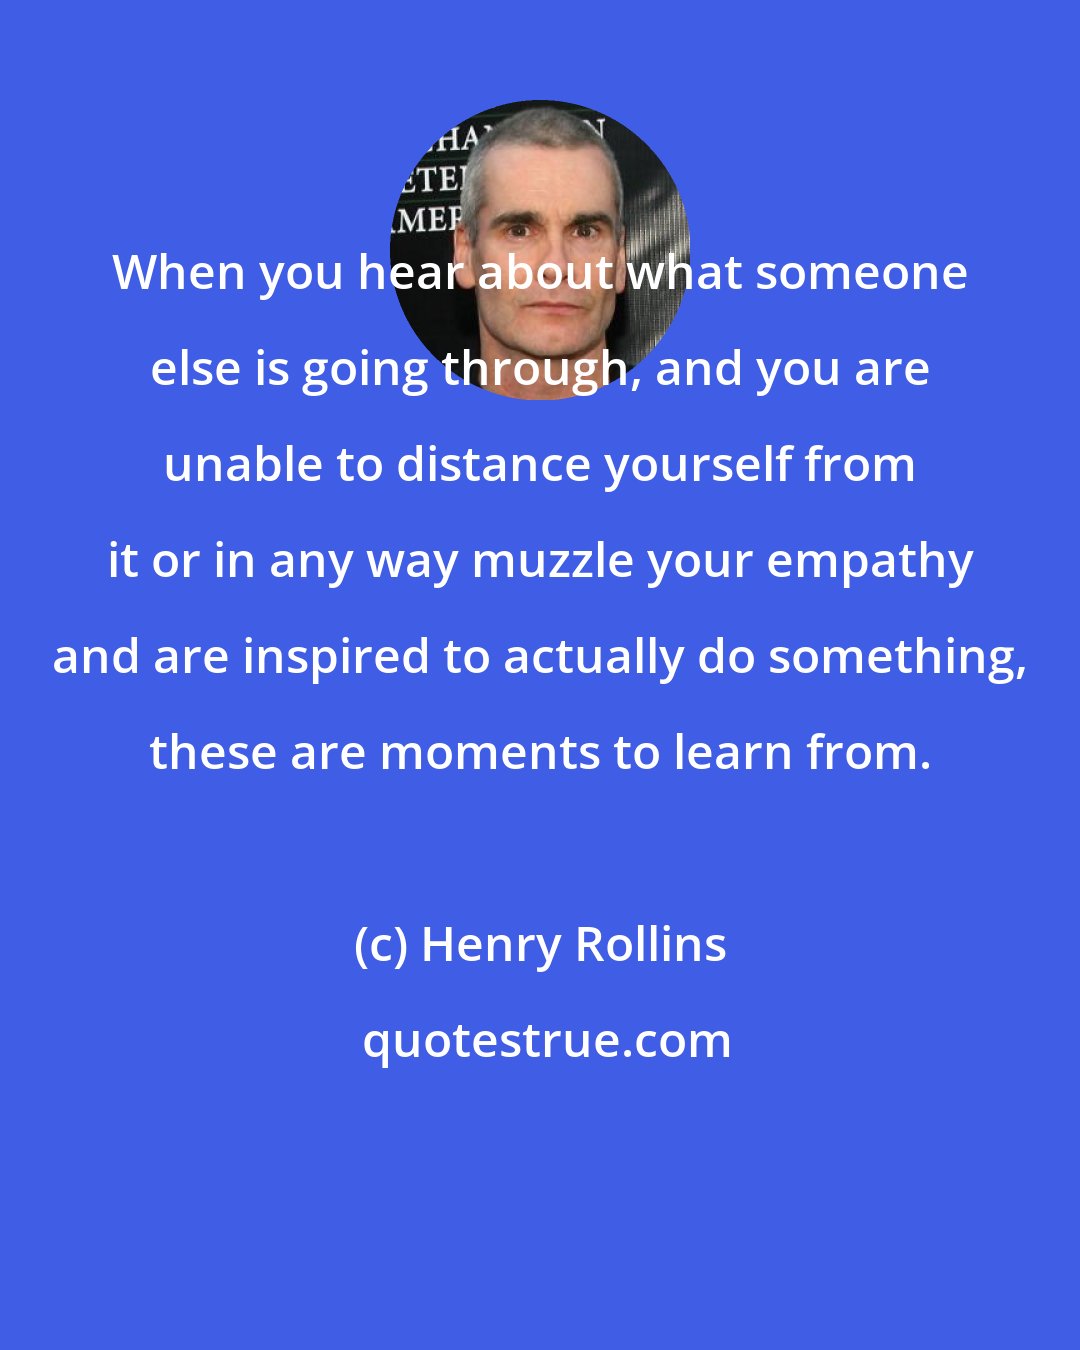 Henry Rollins: When you hear about what someone else is going through, and you are unable to distance yourself from it or in any way muzzle your empathy and are inspired to actually do something, these are moments to learn from.